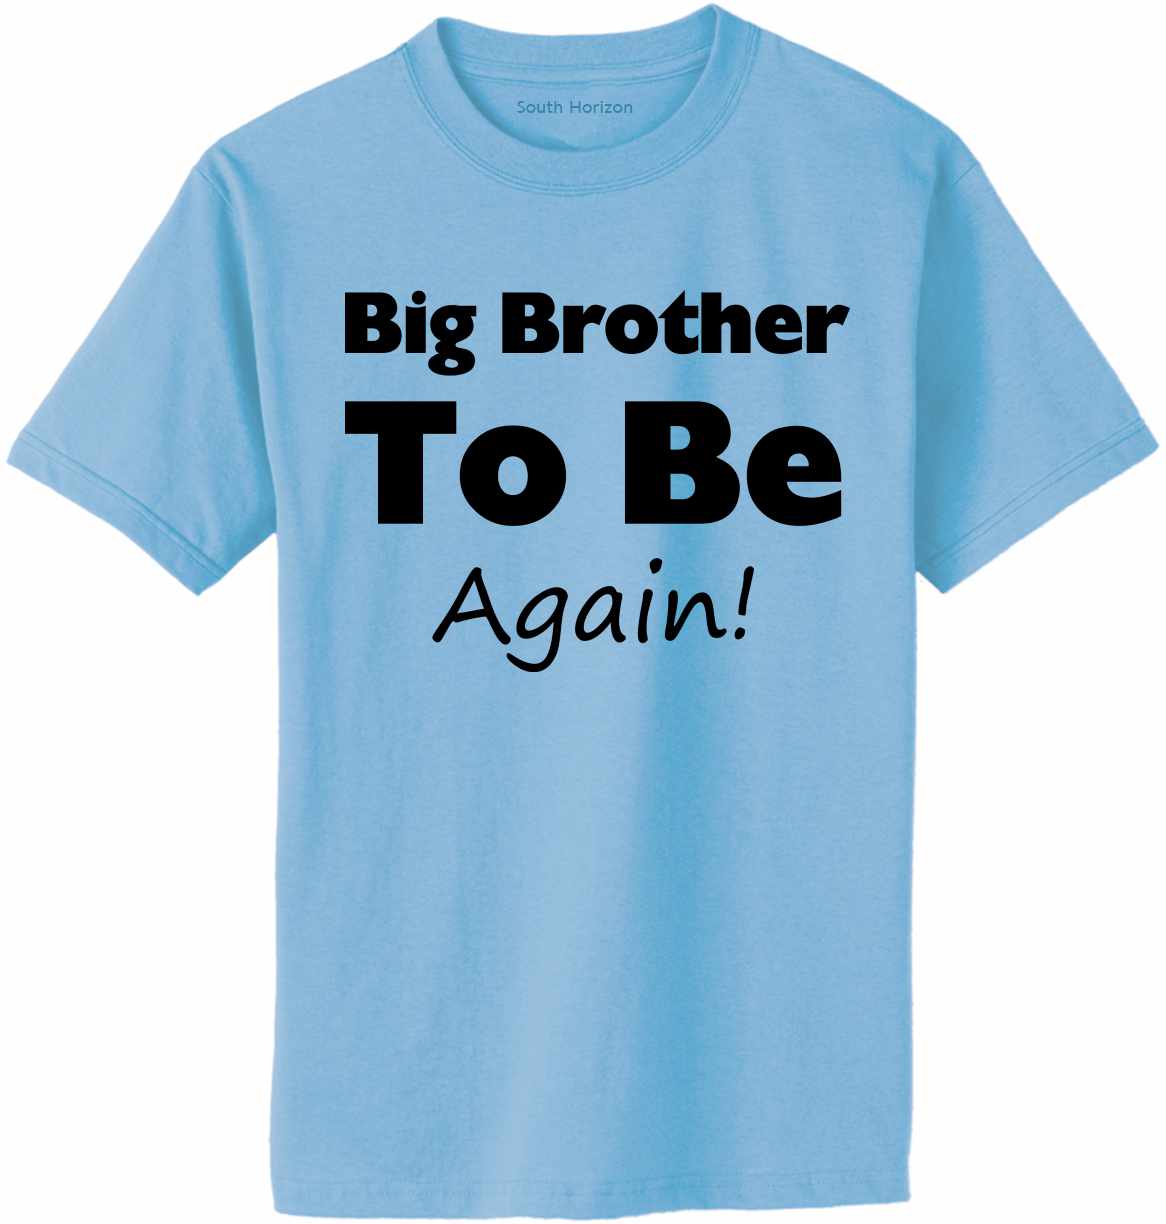 Big Brother To Be Again Adult T-Shirt